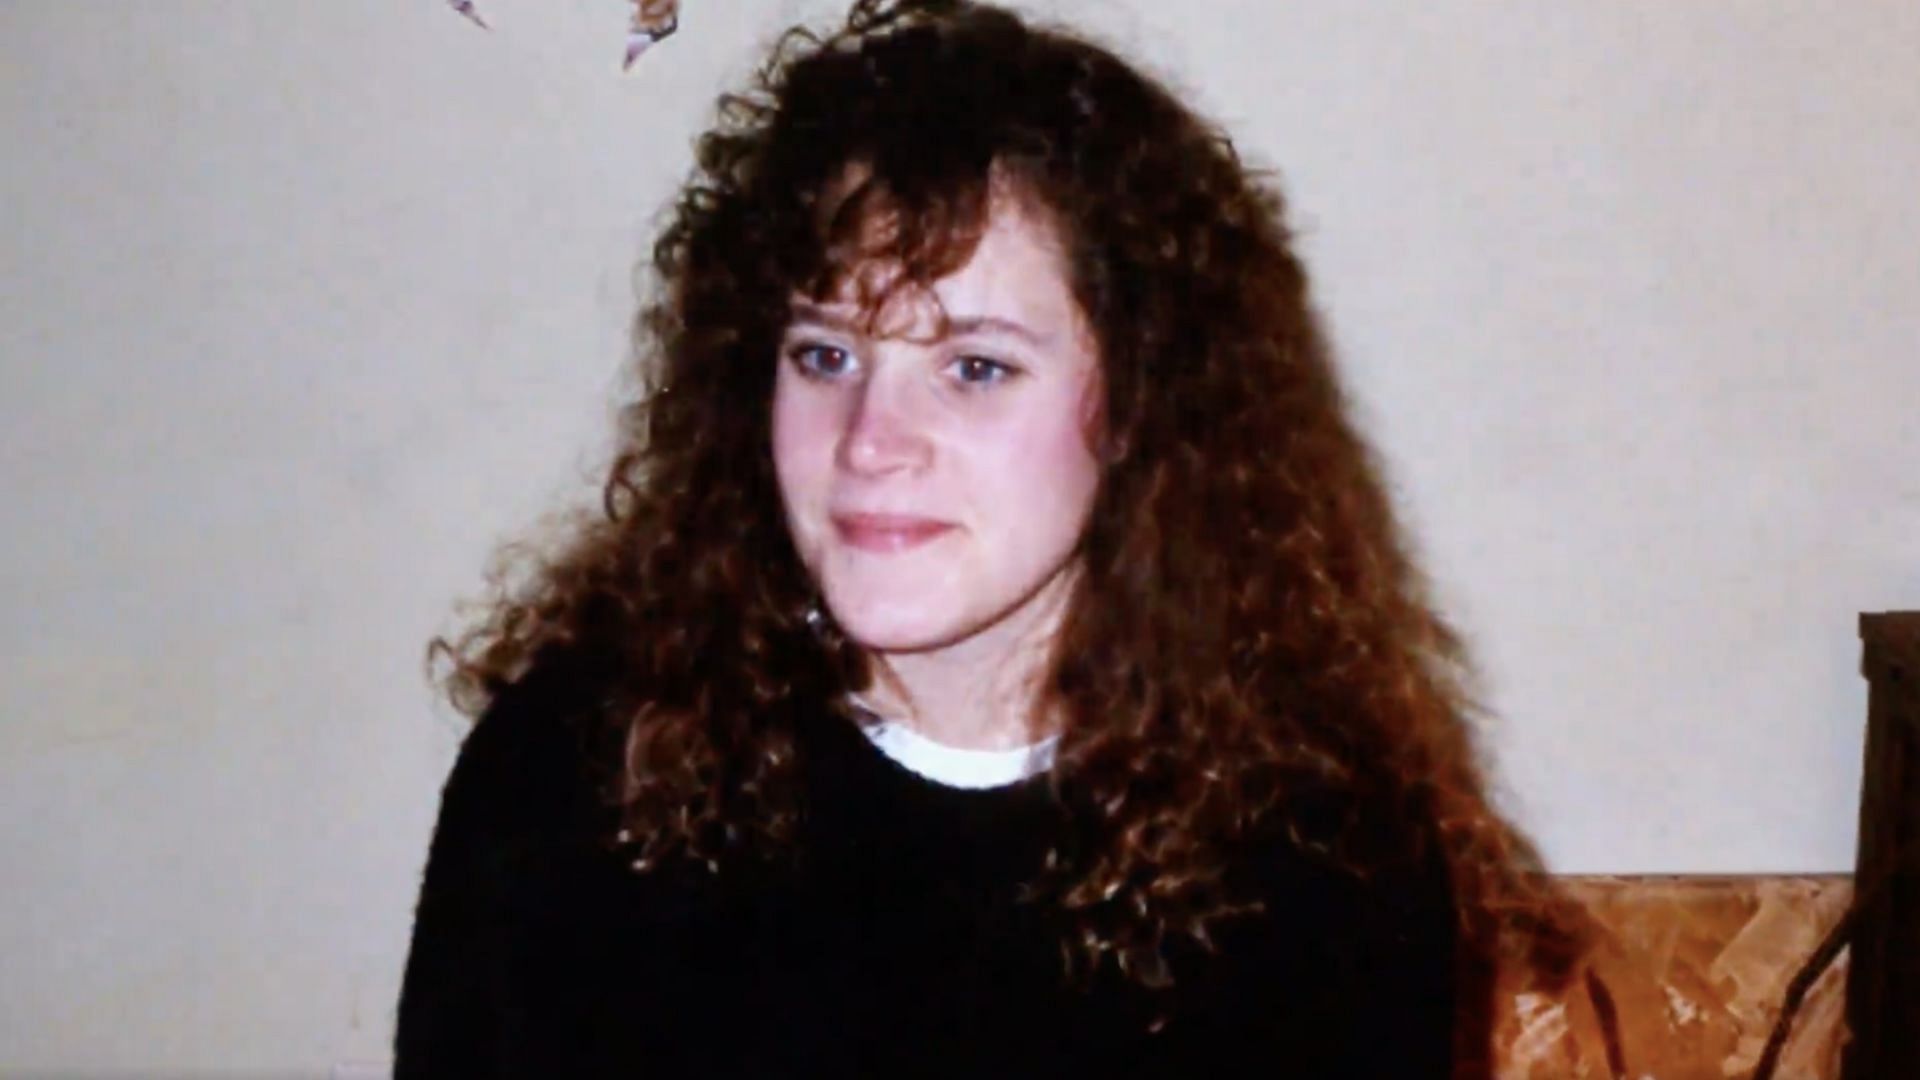 Lisa Ziegert was abducted and killed in 1992 (Image via NBC Dateline)